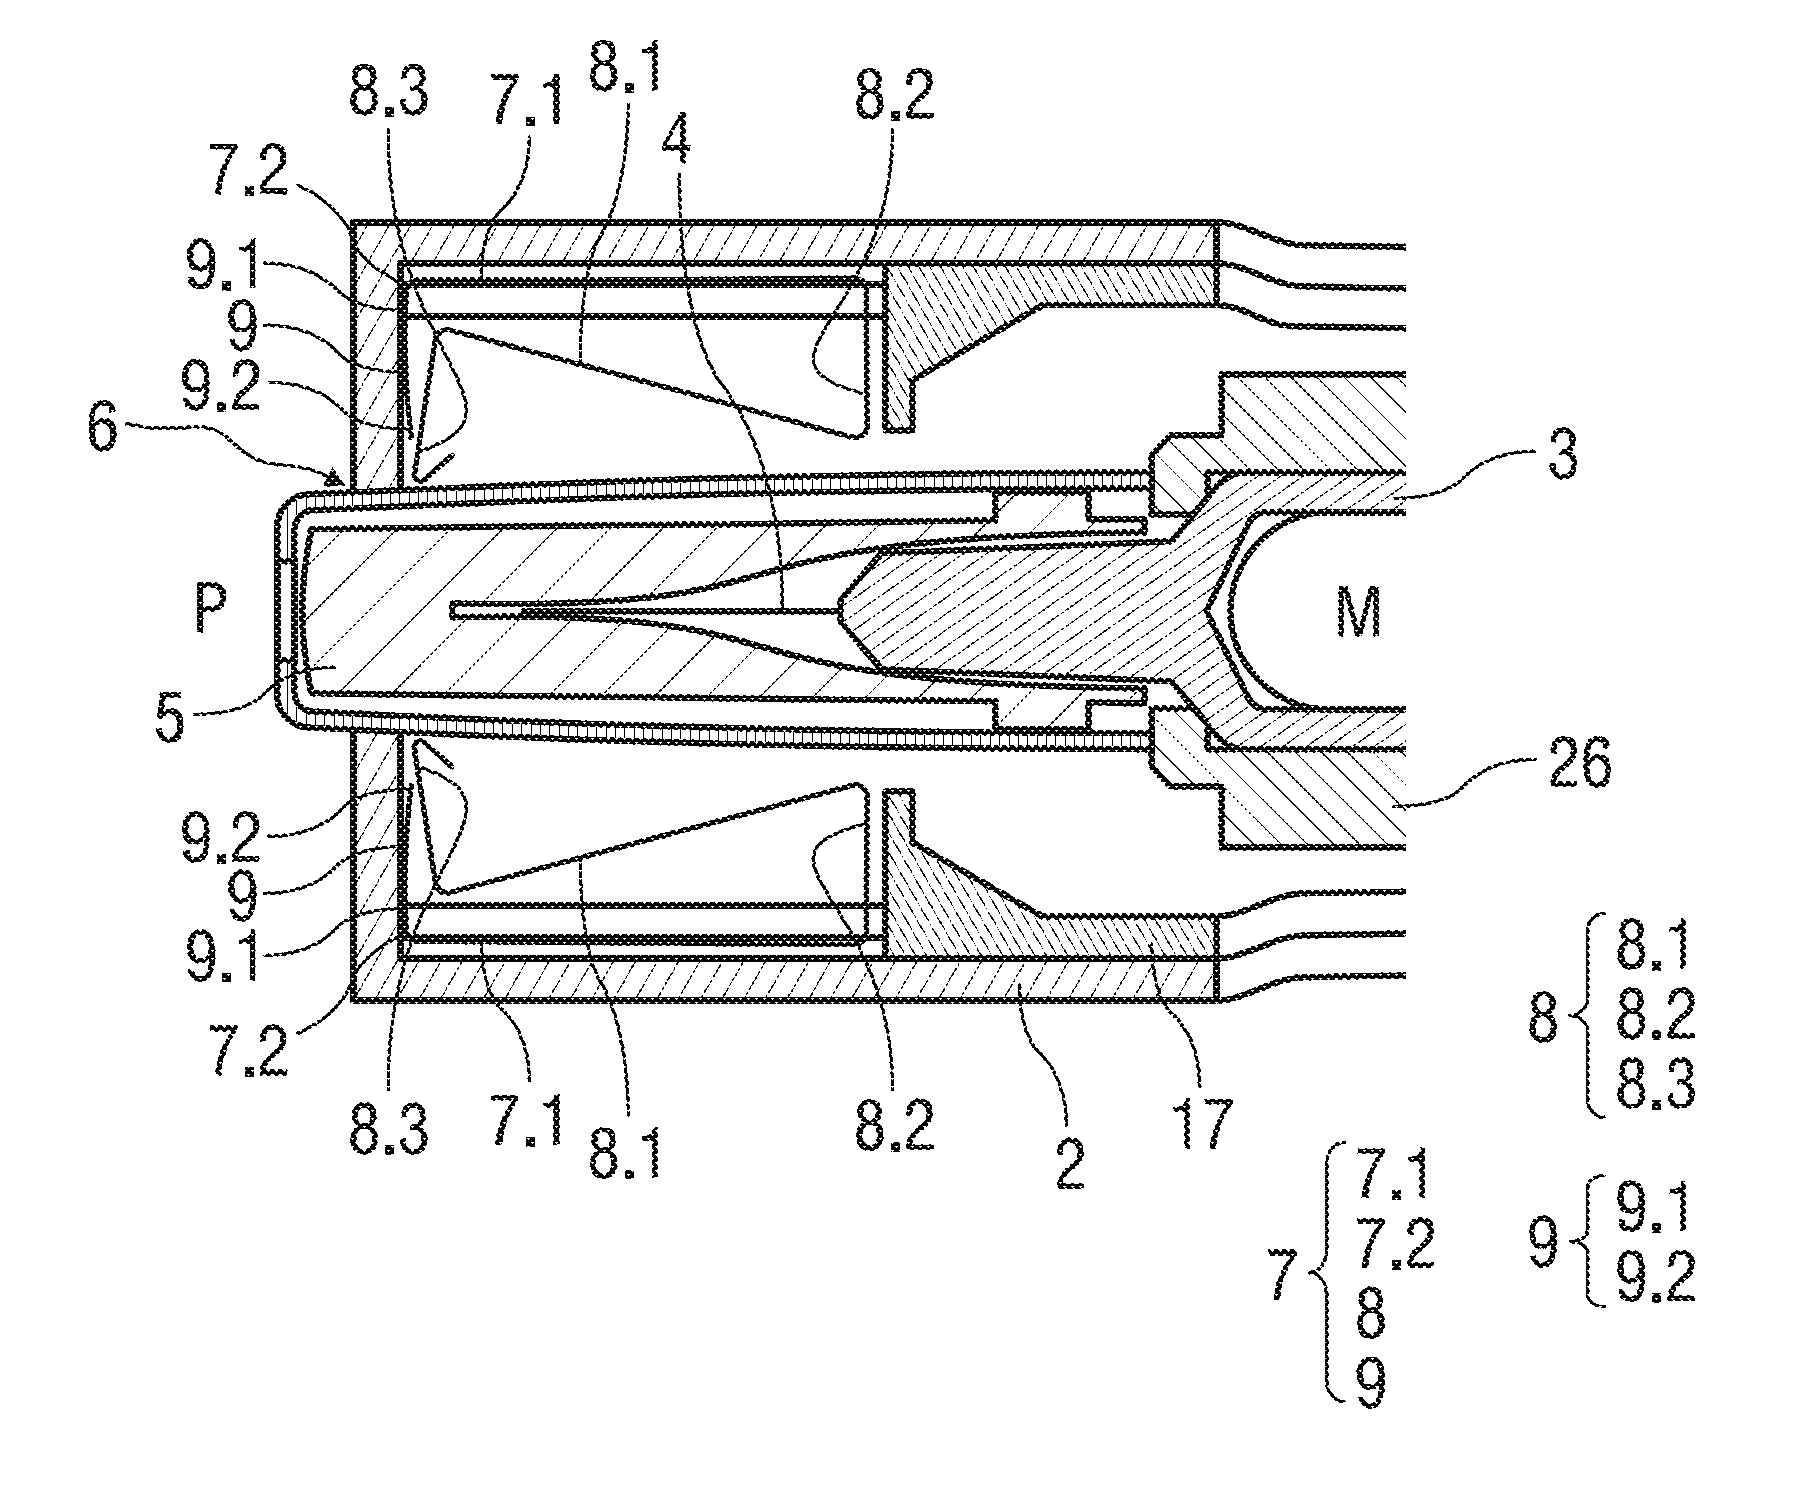 Finger guard for an injection device